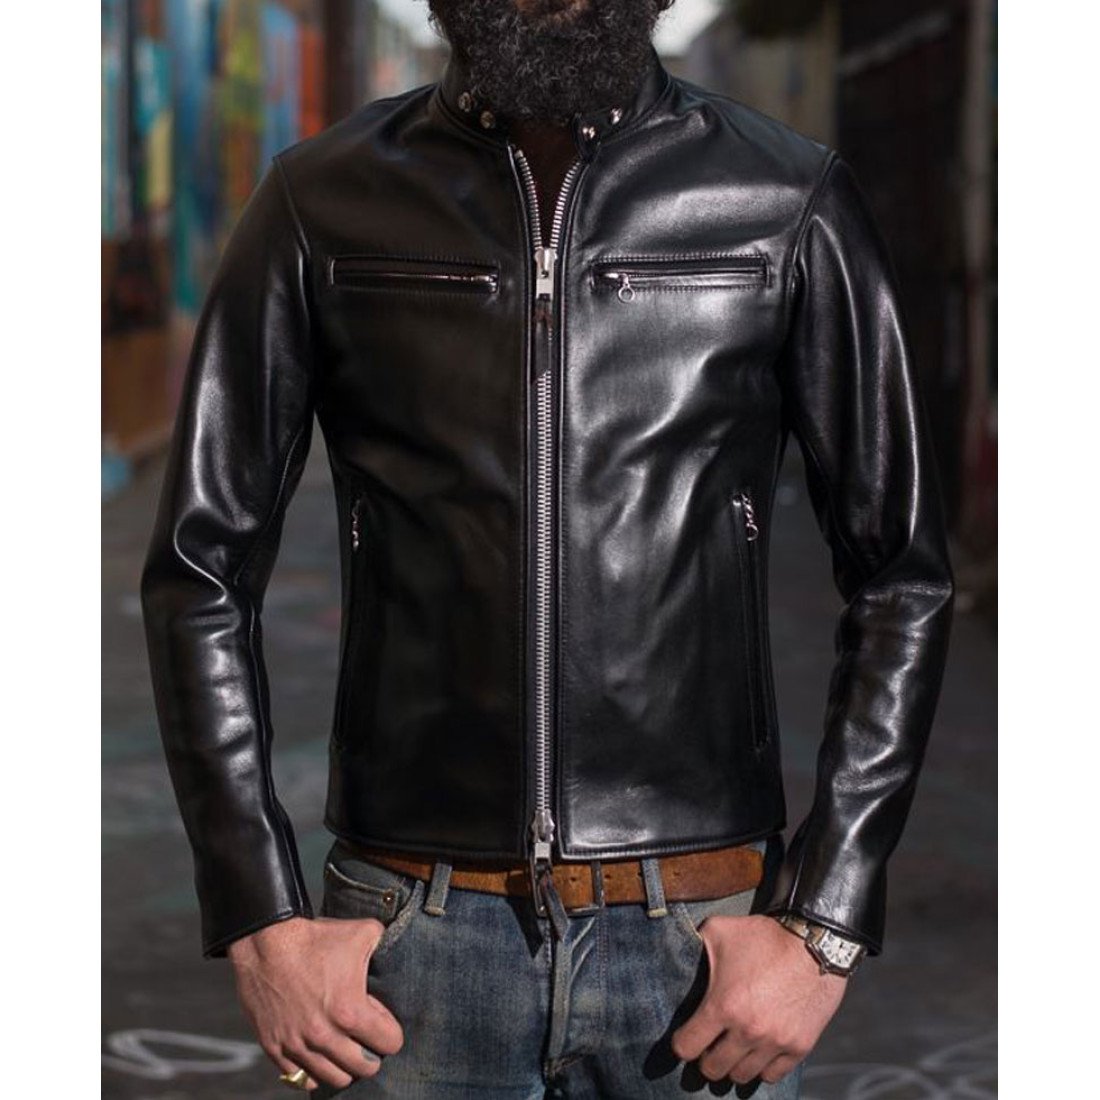 Men's Cafe Racer Rider’s Iron Heart Leather Jacket - Films Jackets